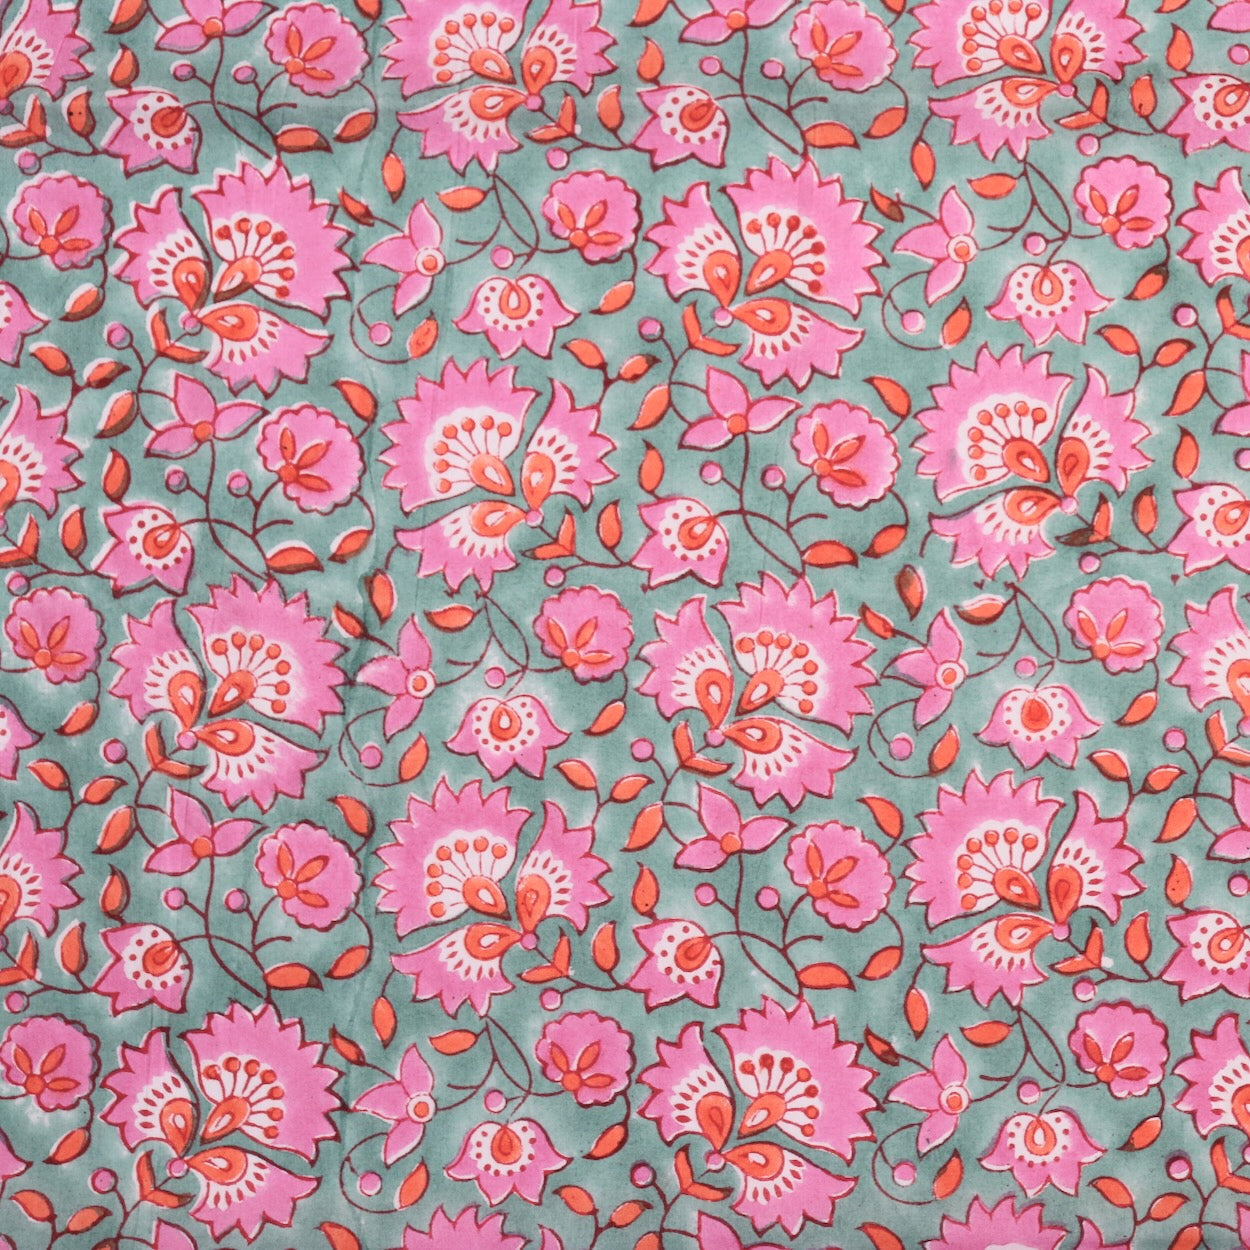 bright pink and blue hand block print cotton dress fabric 